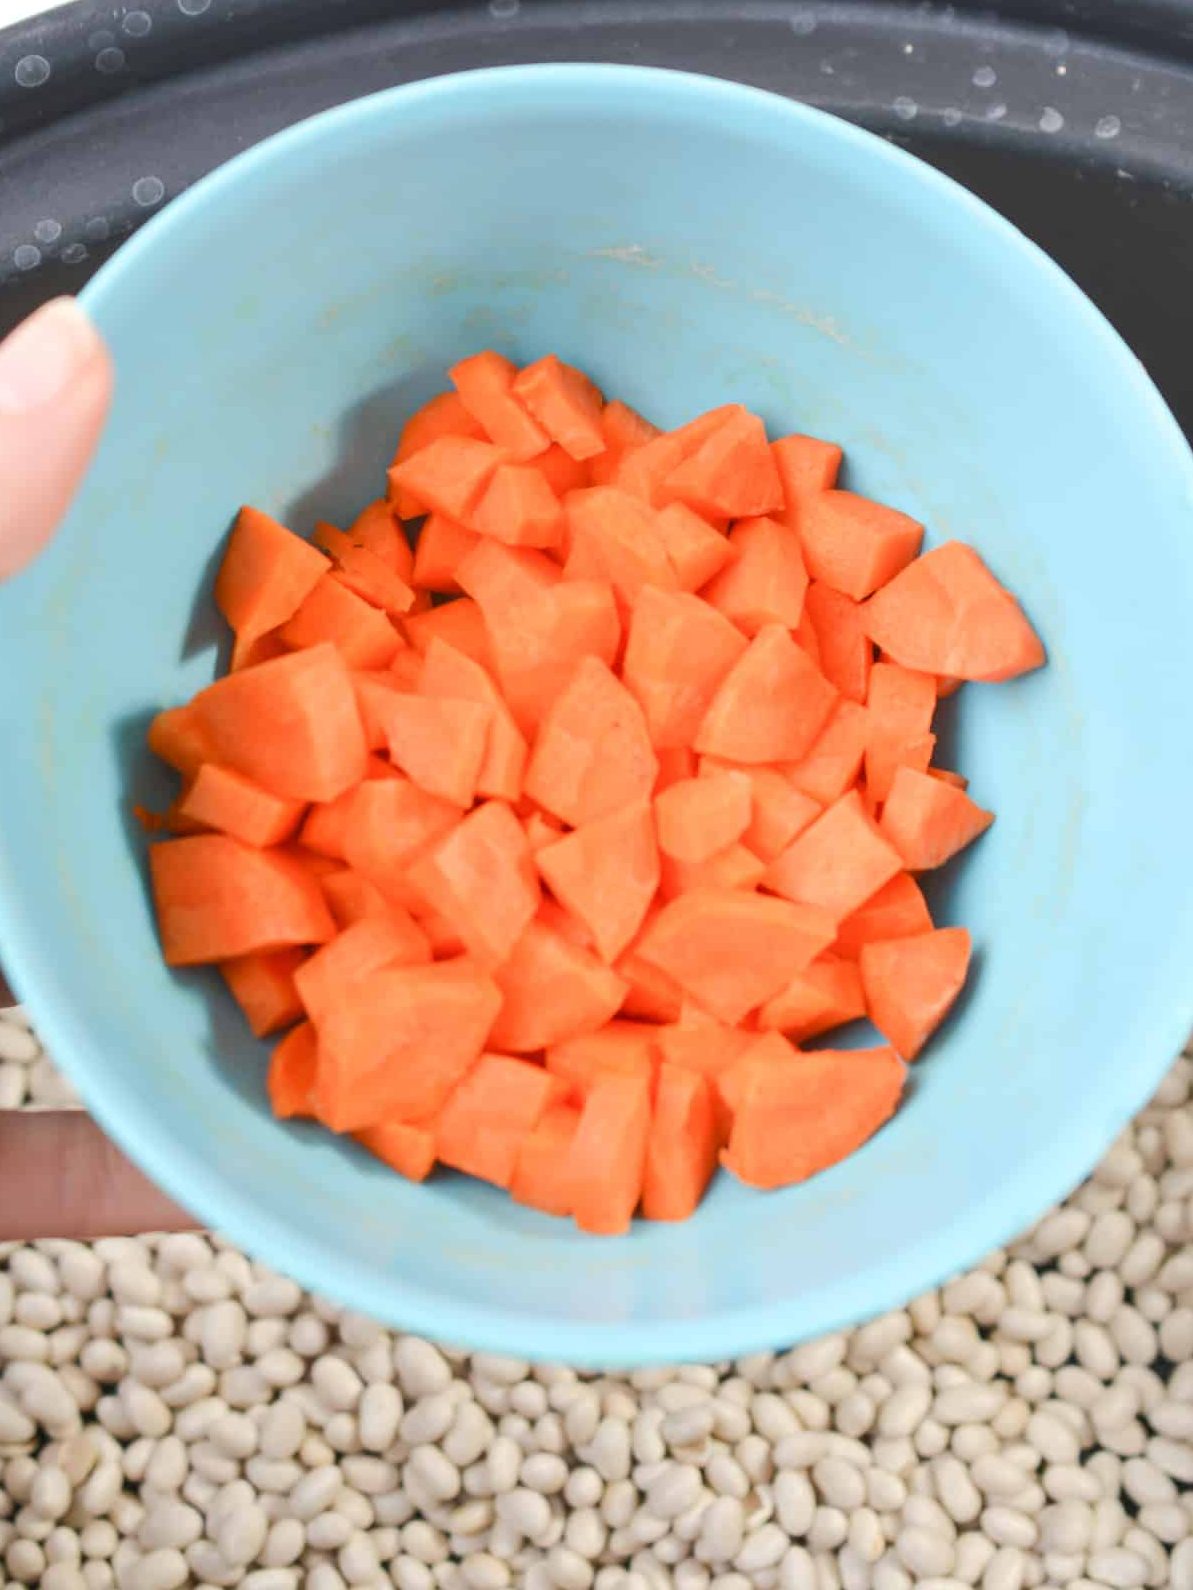  add ¾ cup of chopped carrots.